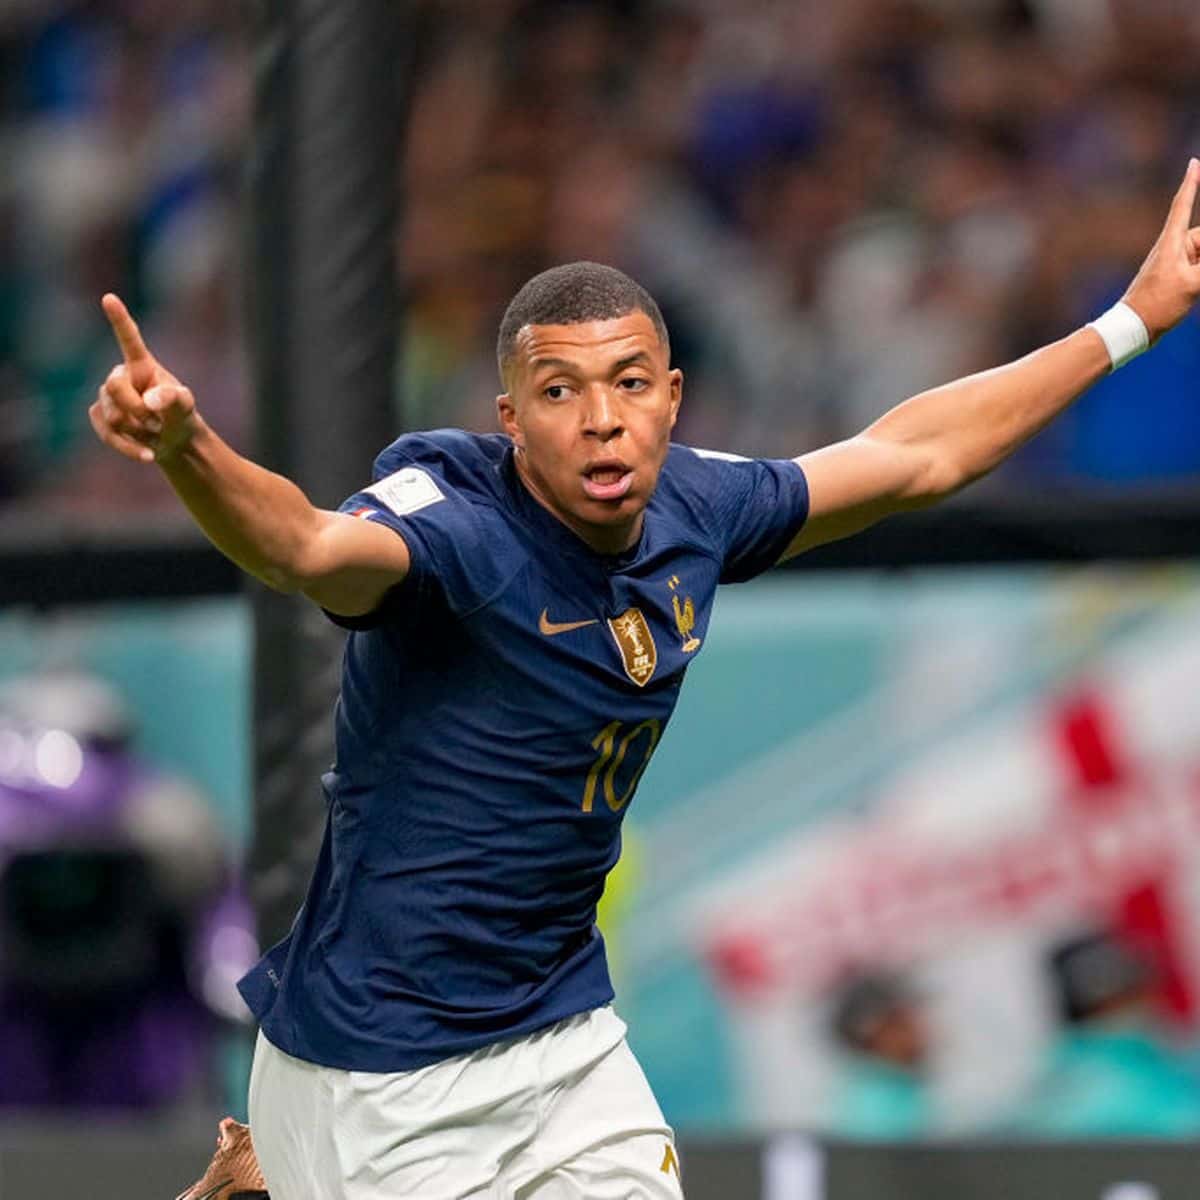 Mbappe gives France 2022 Qatar World Cup round of 16 slot